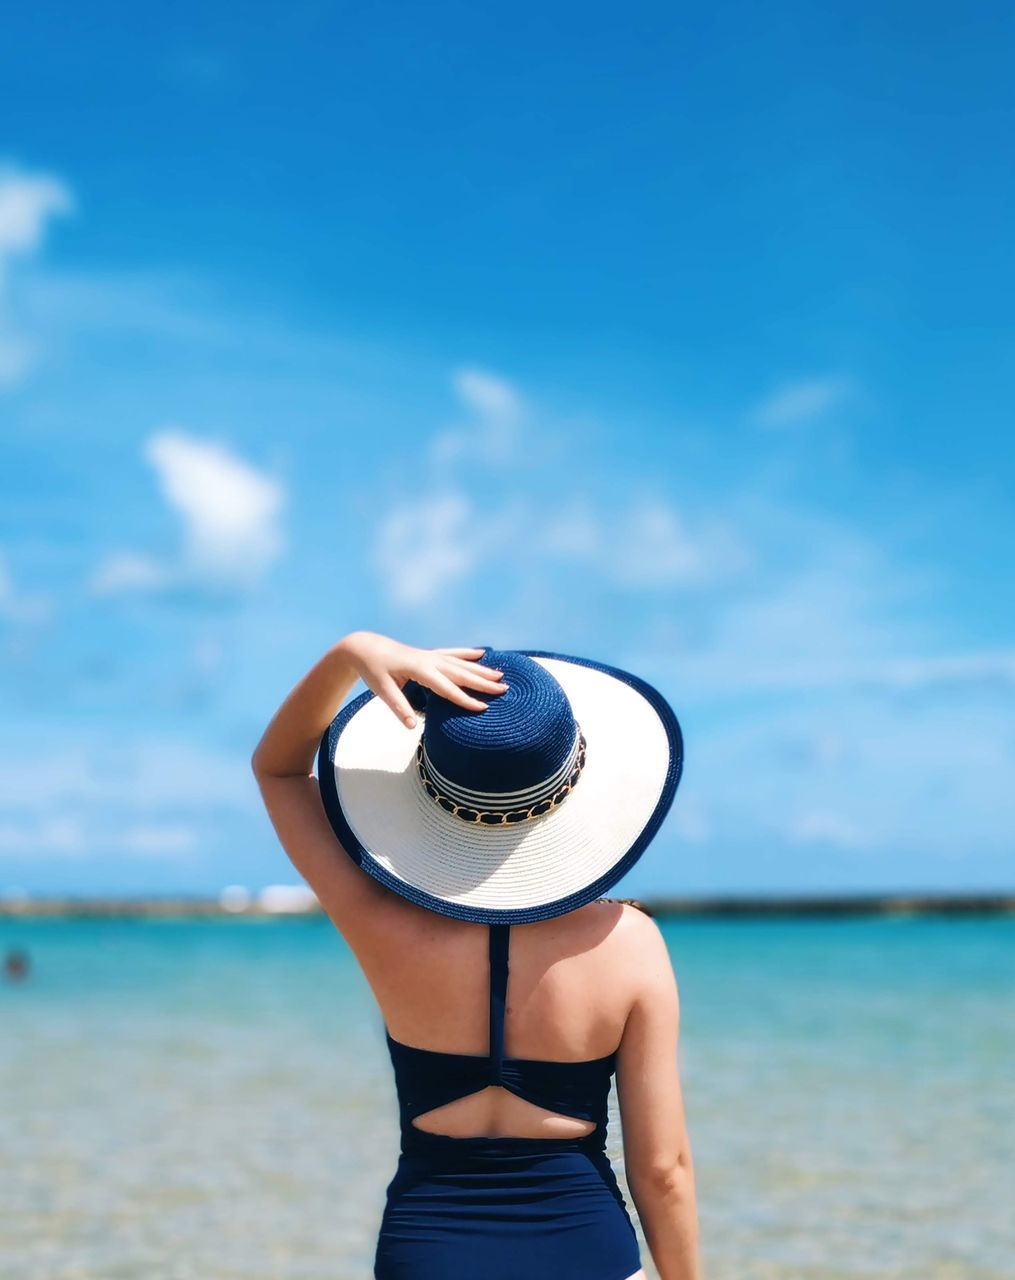 hat, one person, sea, clothing, sky, water, leisure activity, lifestyles, women, real people, vacations, beach, trip, holiday, day, adult, land, horizon, nature, horizon over water, outdoors, sun hat, turquoise colored